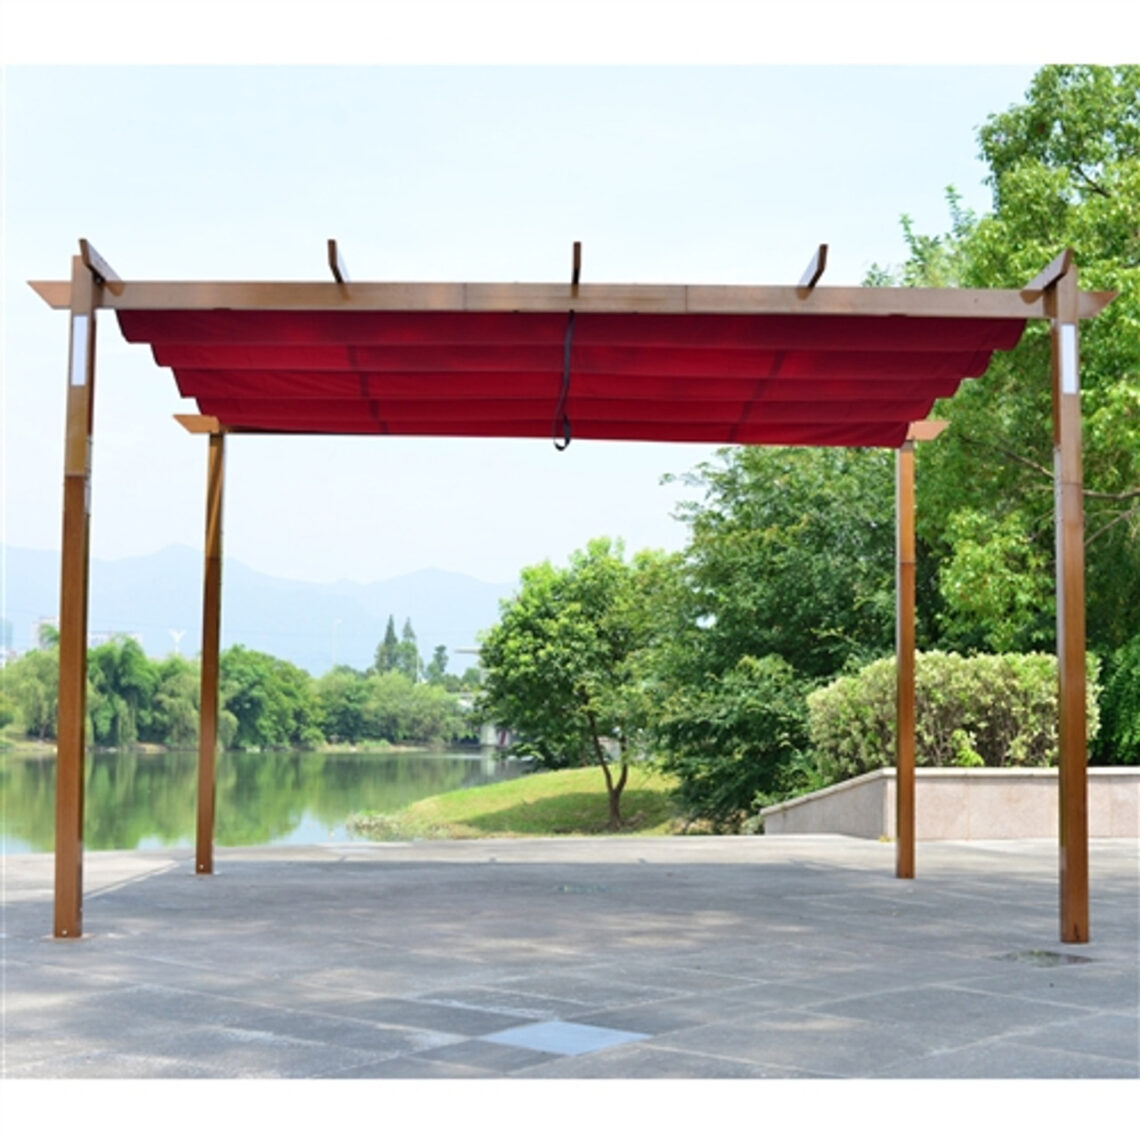 How Much Does a Pergola Cost?